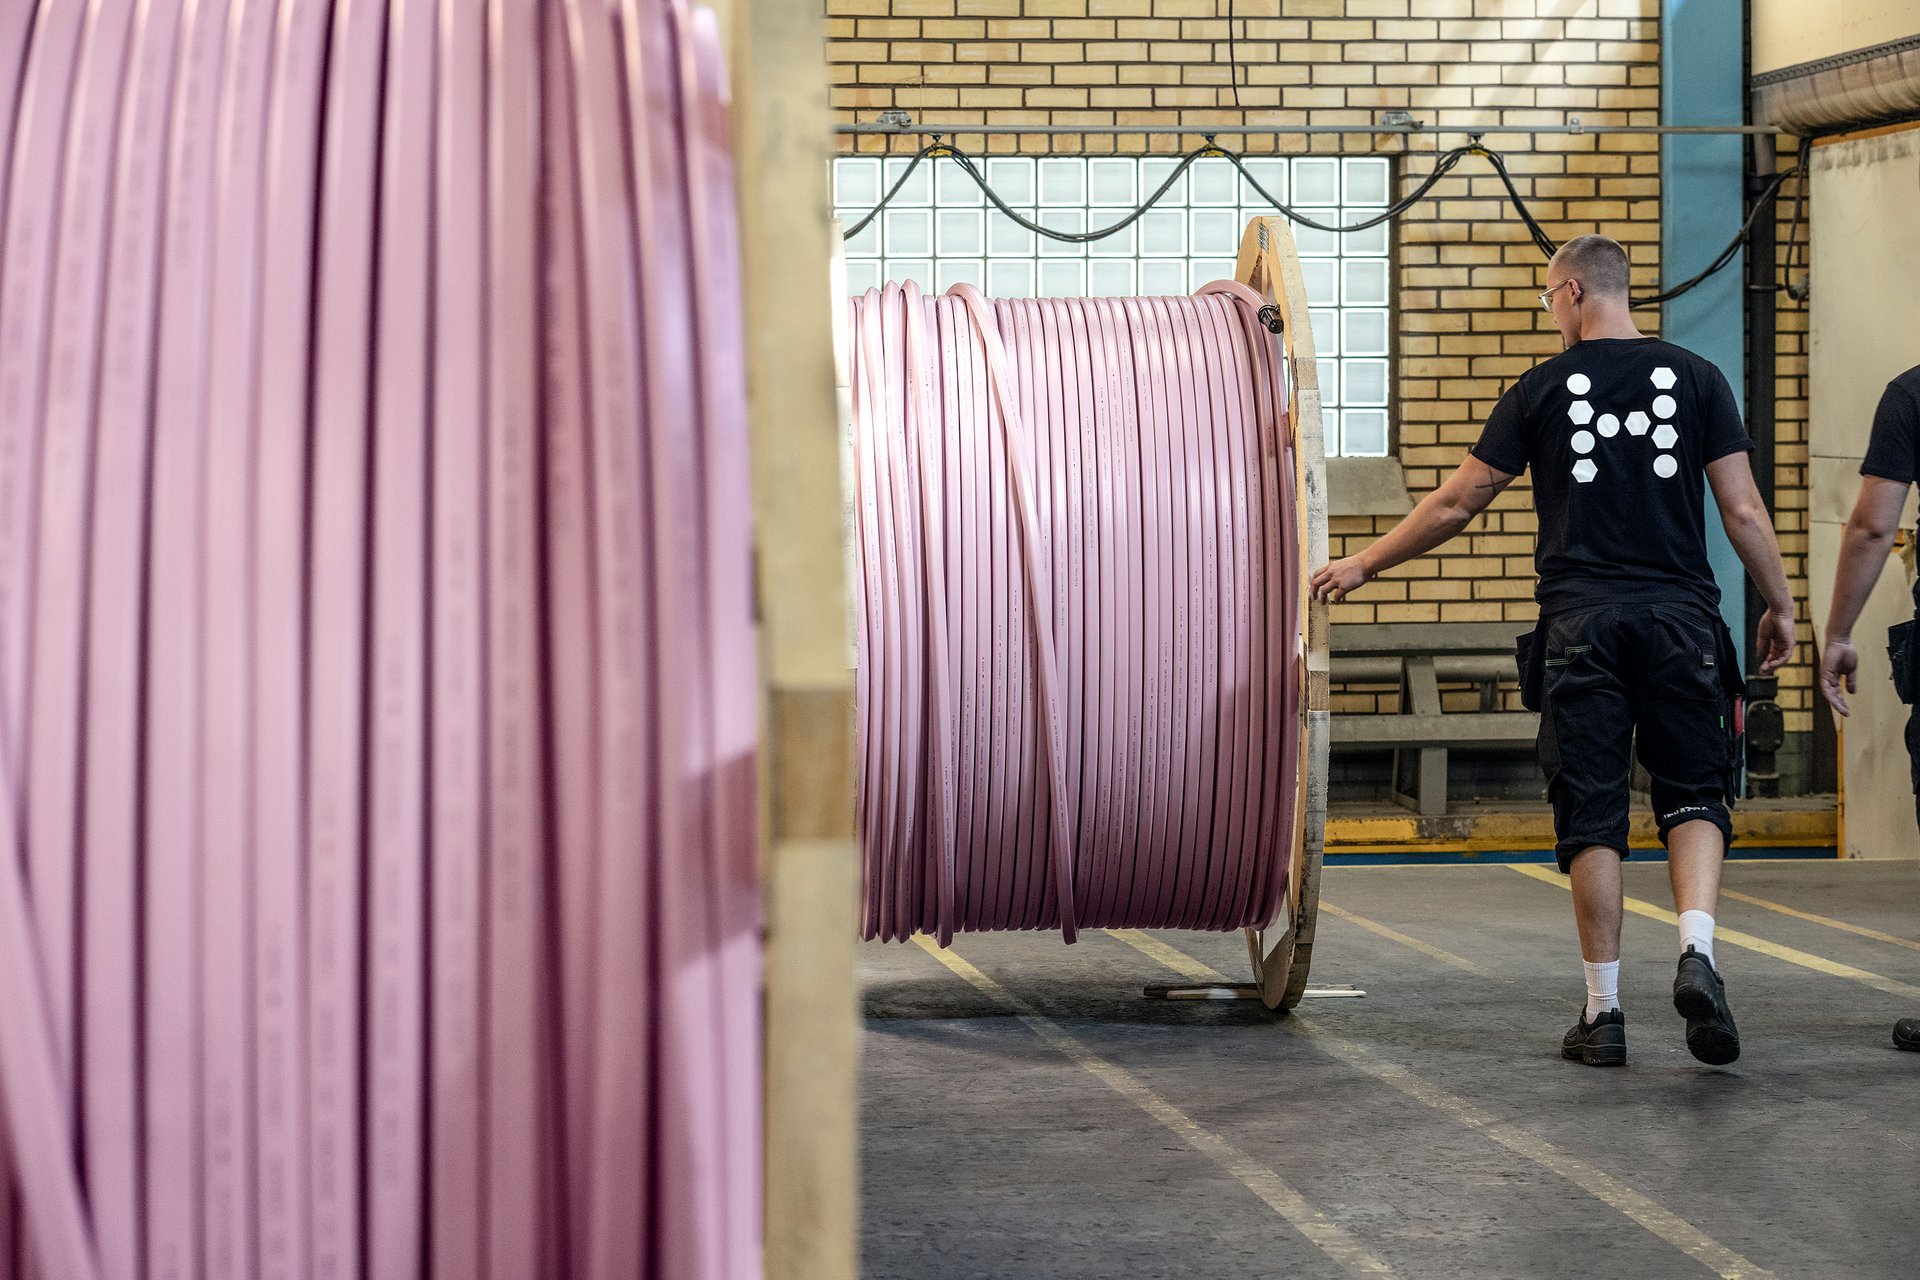 A person in a warehouse walks past a large spool of pink microduct. More coils and industrial elements are visible.